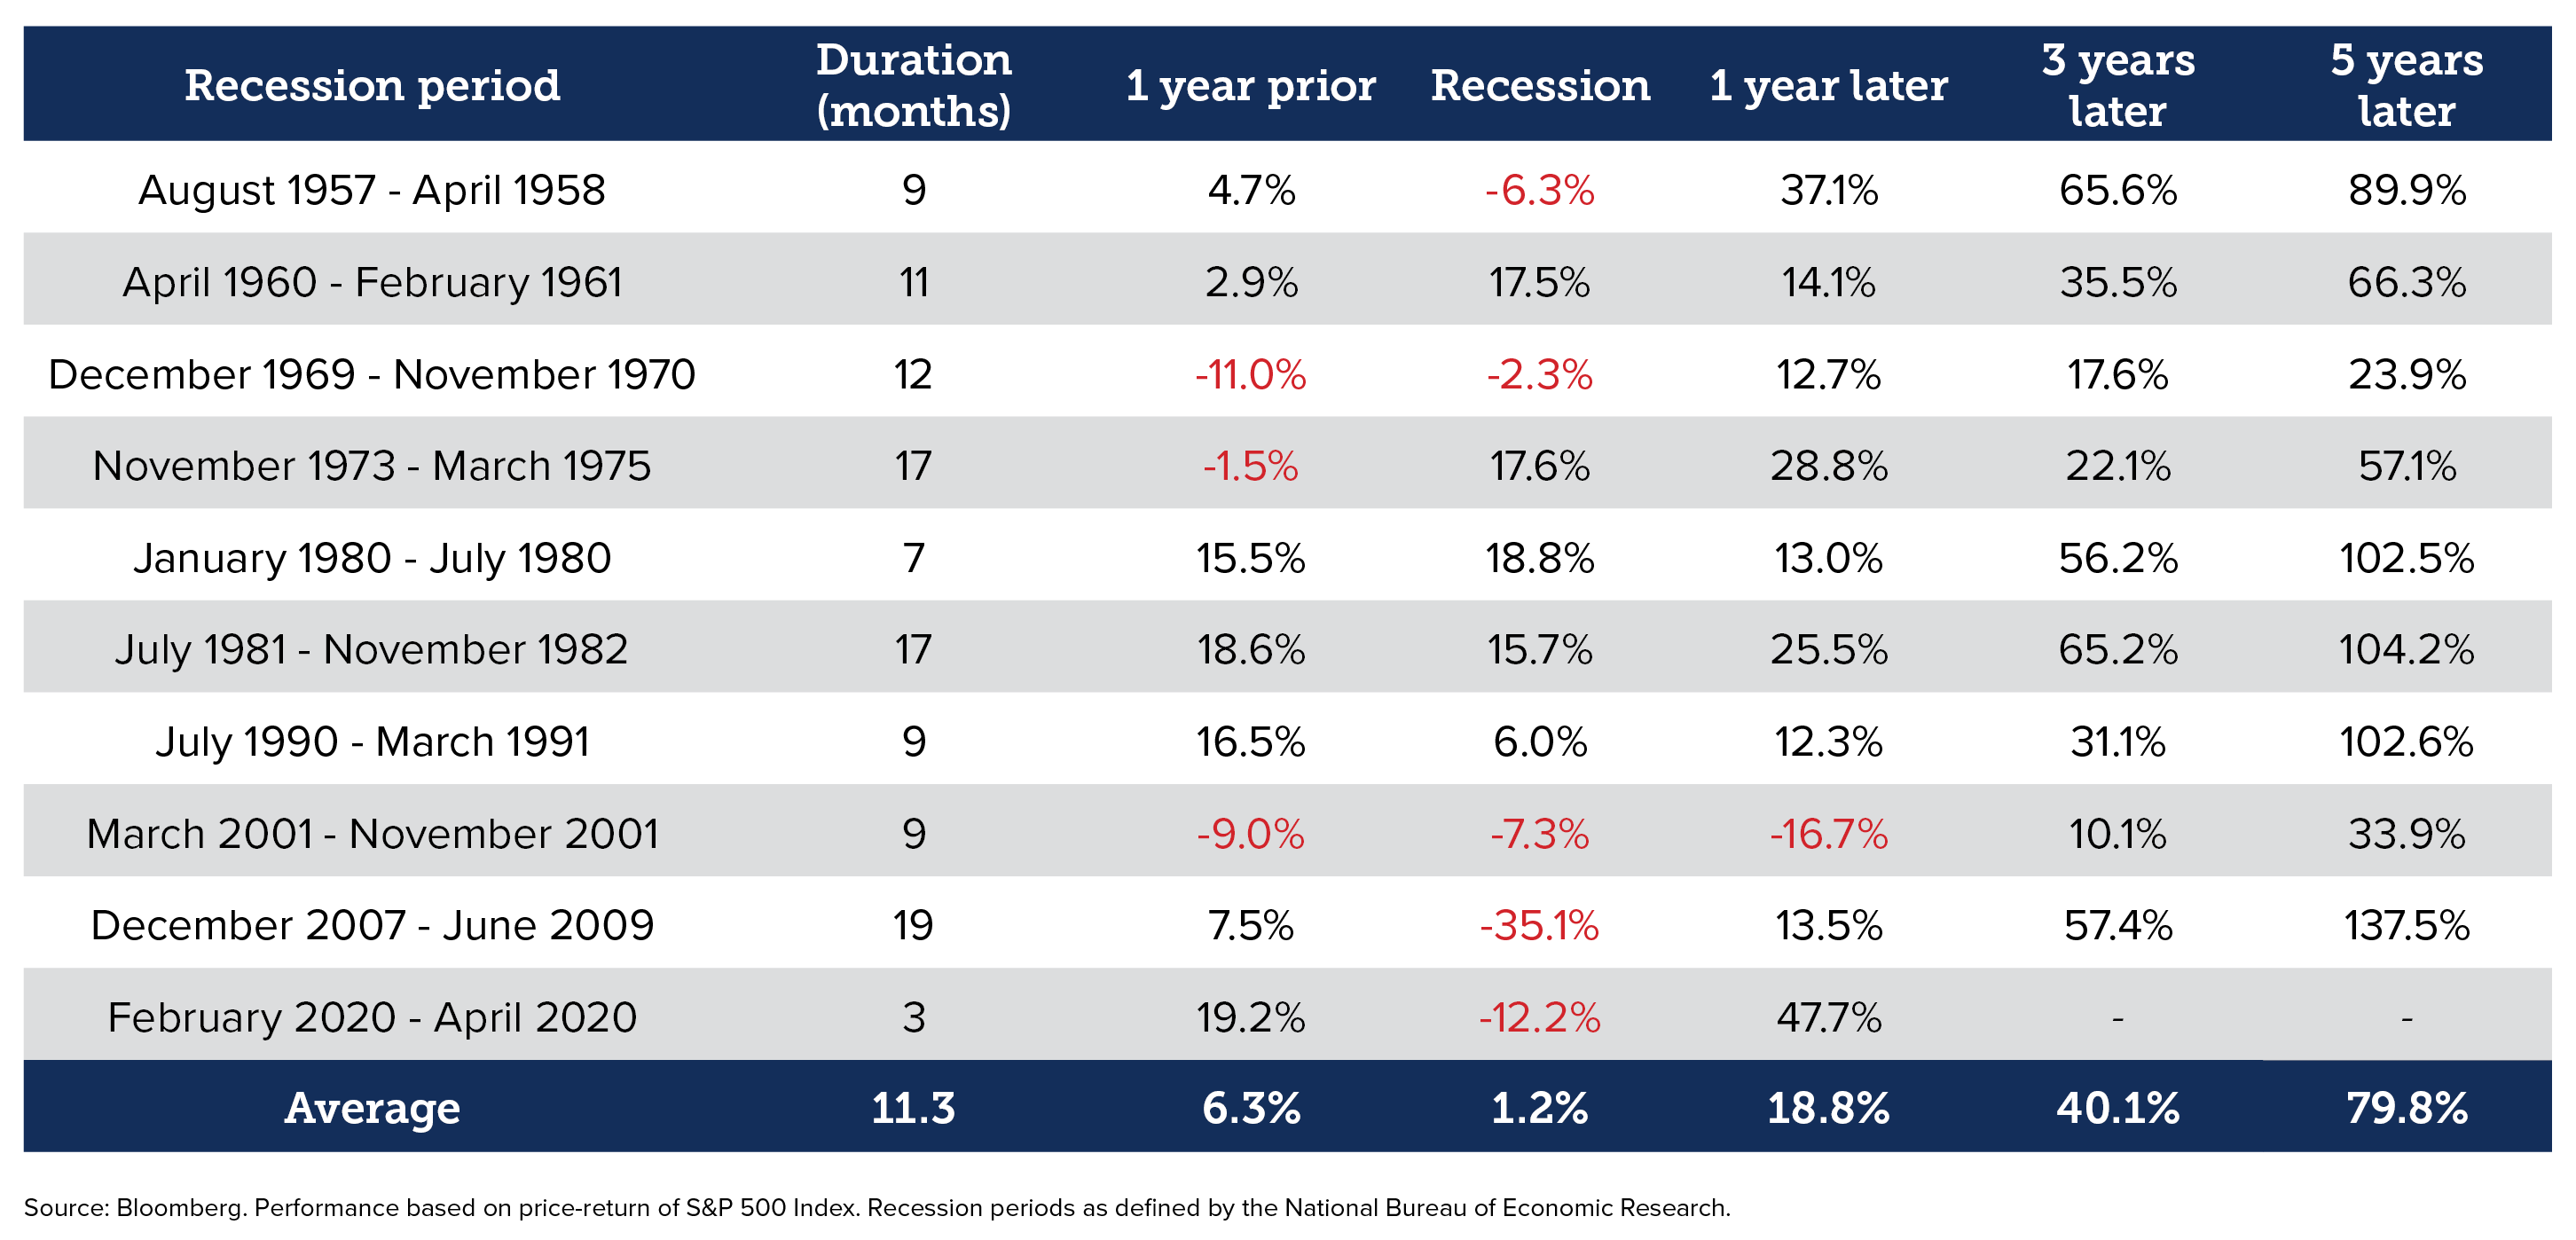 Duration of Recession Periods